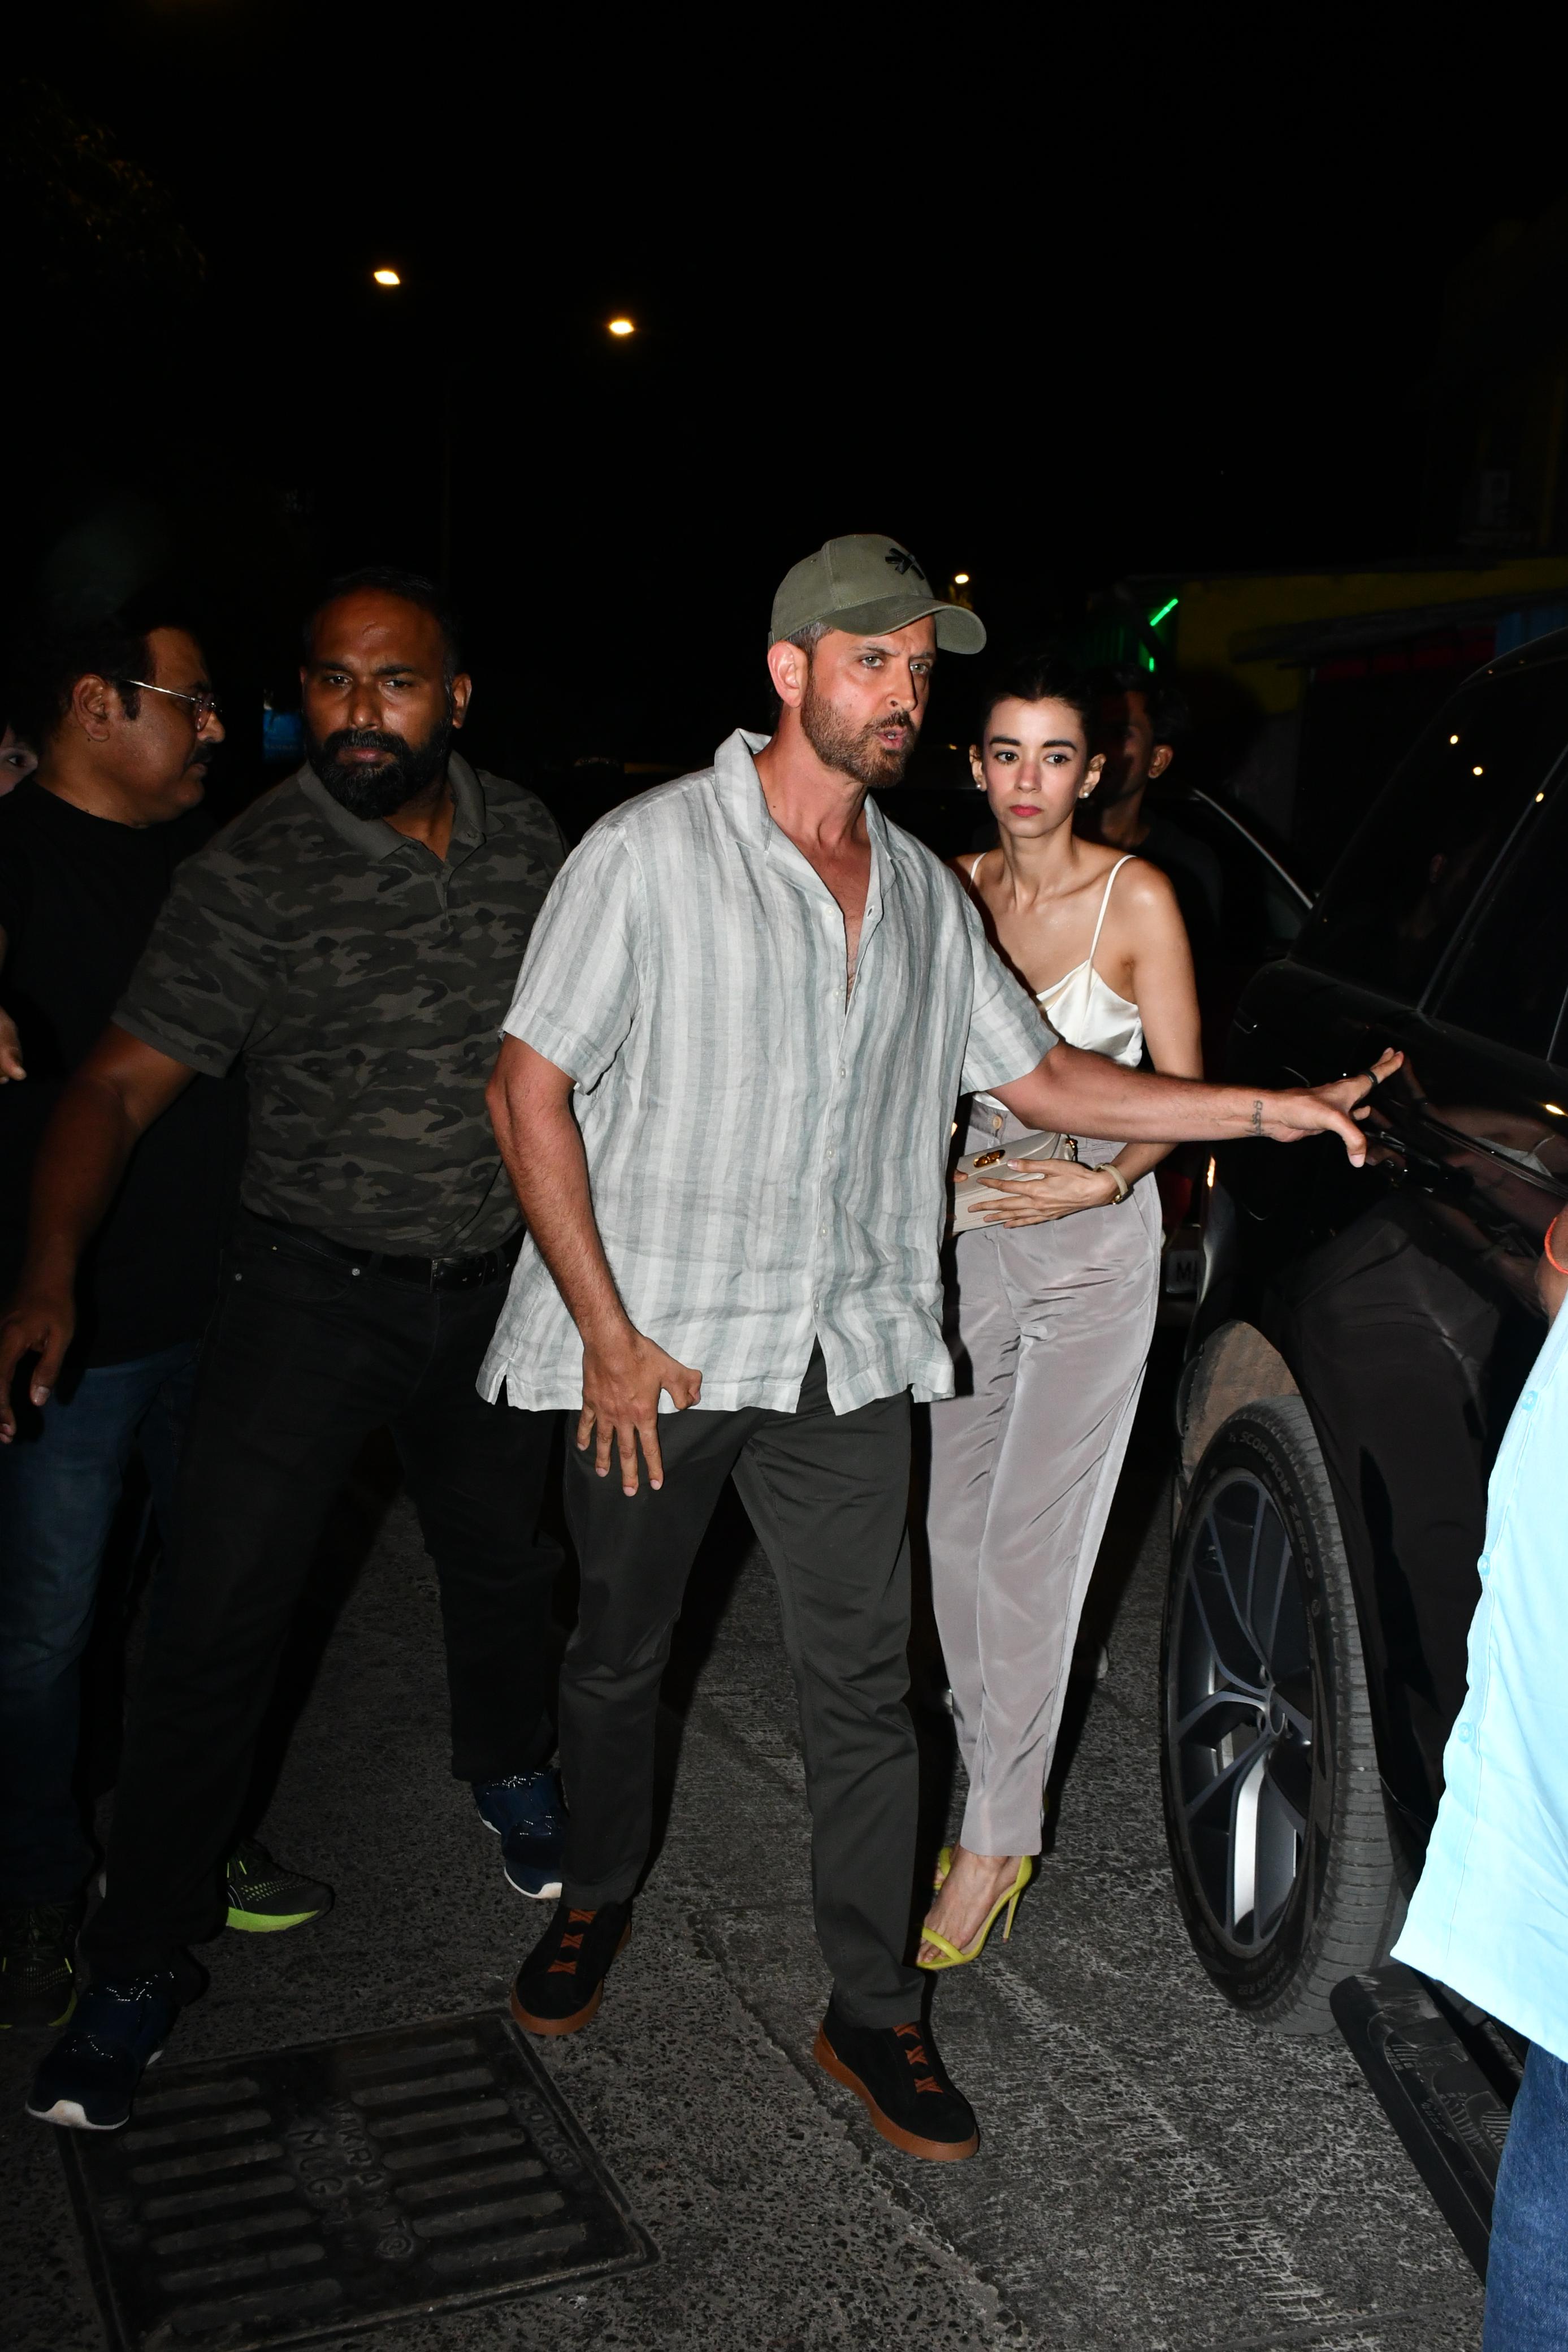 Later, Hrithik Roshan was also seen arriving at the venue in his car, accompanied by his girlfriend Saba Azad